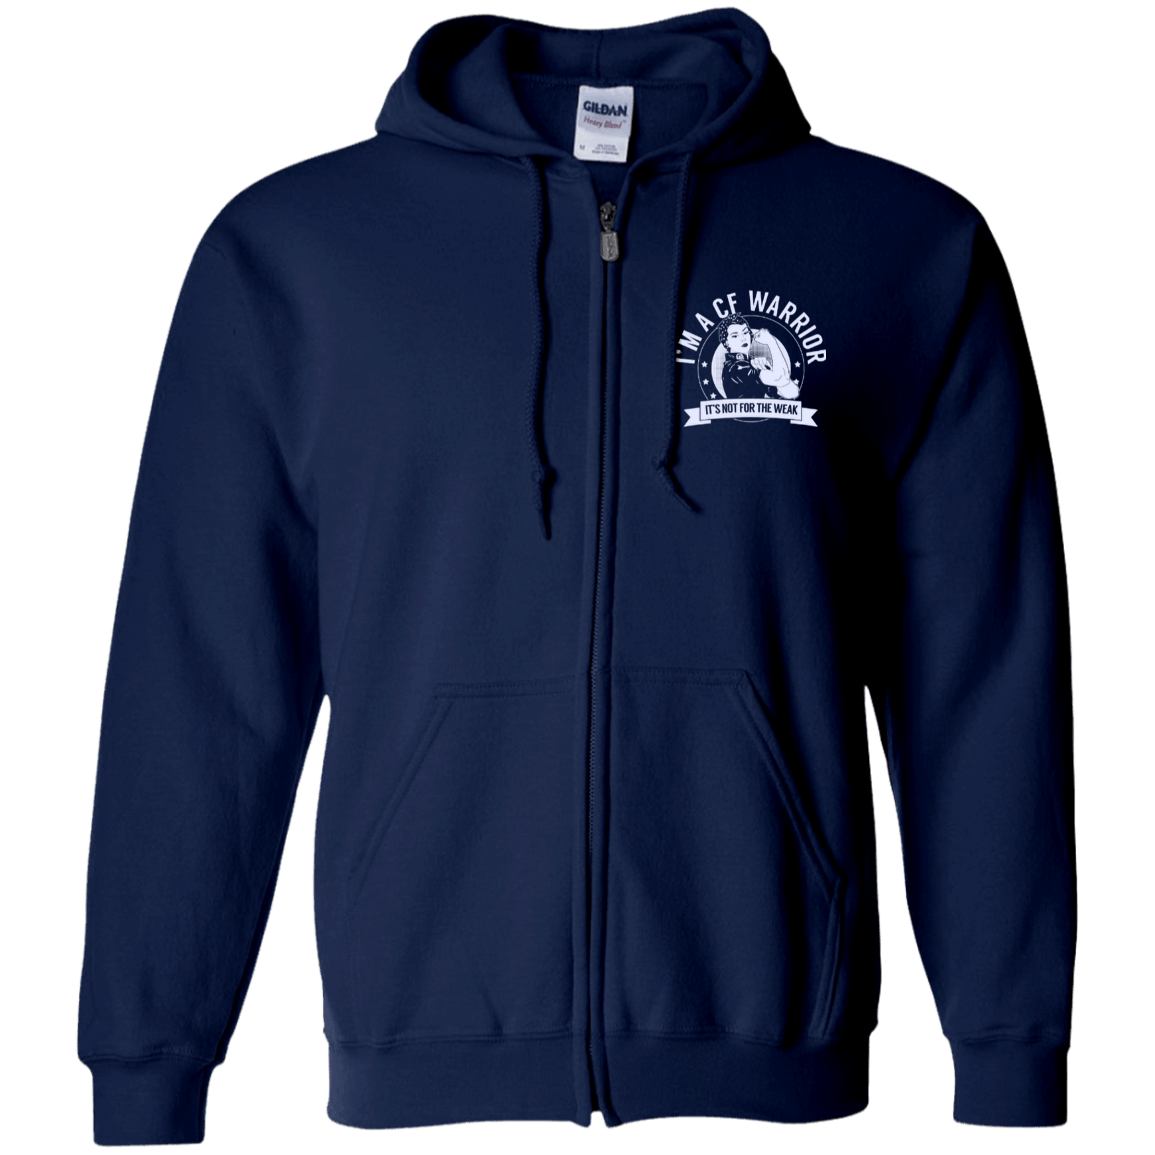 Cystic Fibrosis Warrior Not For The Weak Zip Up Hooded Sweatshirt - The Unchargeables